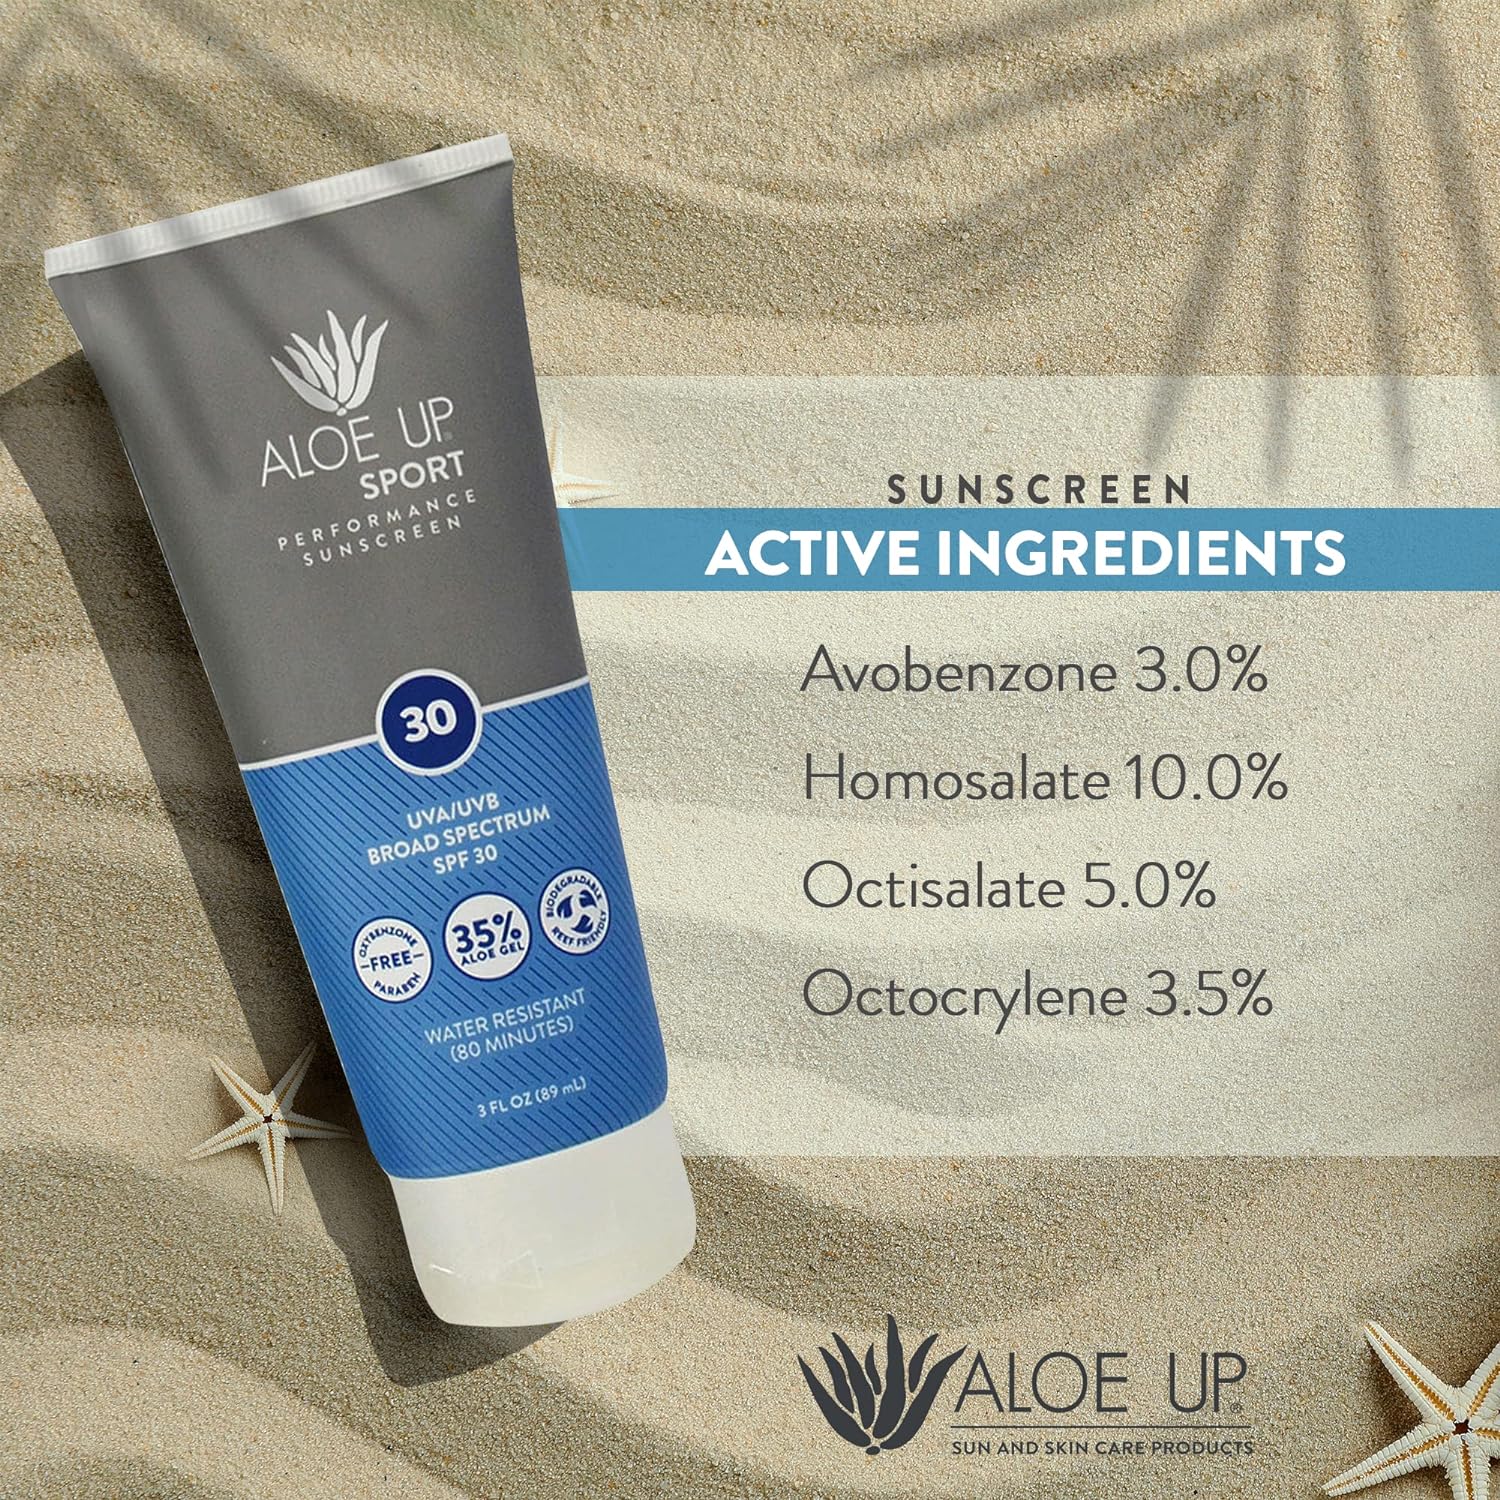 Aloe Up Sport Sunscreen Lotion SPF 30 - Broad Spectrum UVA/UVB Sunscreen Protector for Face and Body - With Hydrating Aloe Vera Gel - Non-Greasy - No White Cast - Reef Safe - Fragrance-Free - 3 Oz. : Beauty & Personal Care